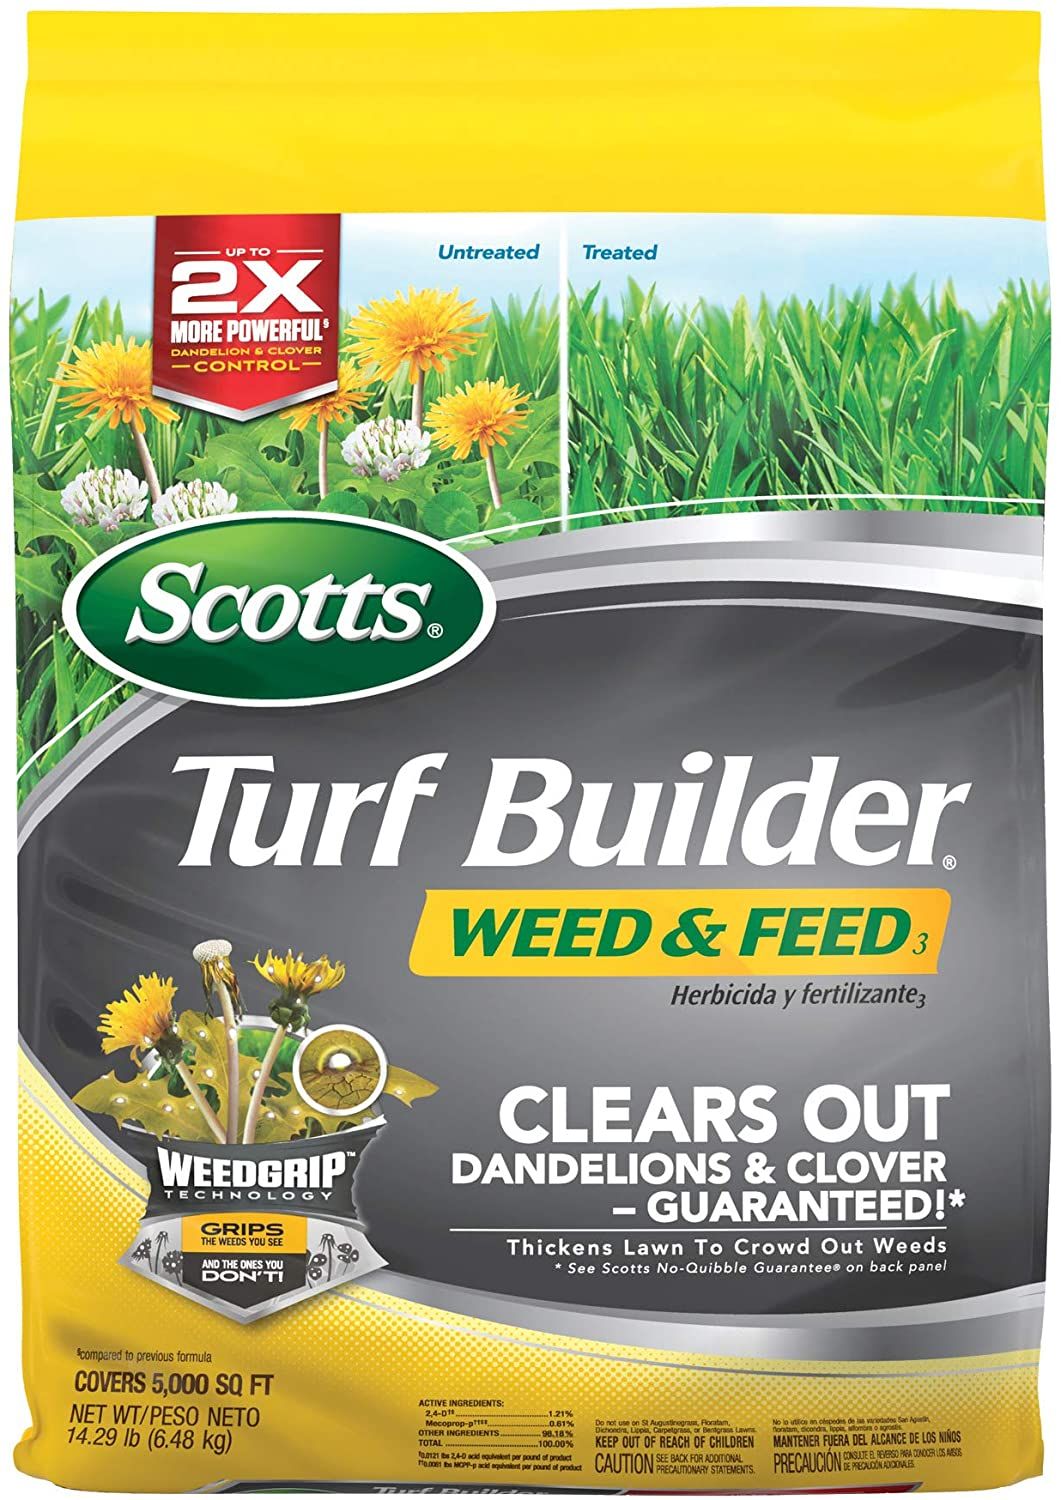 Scotts Turf Builder Weed and Feed - $$title$$